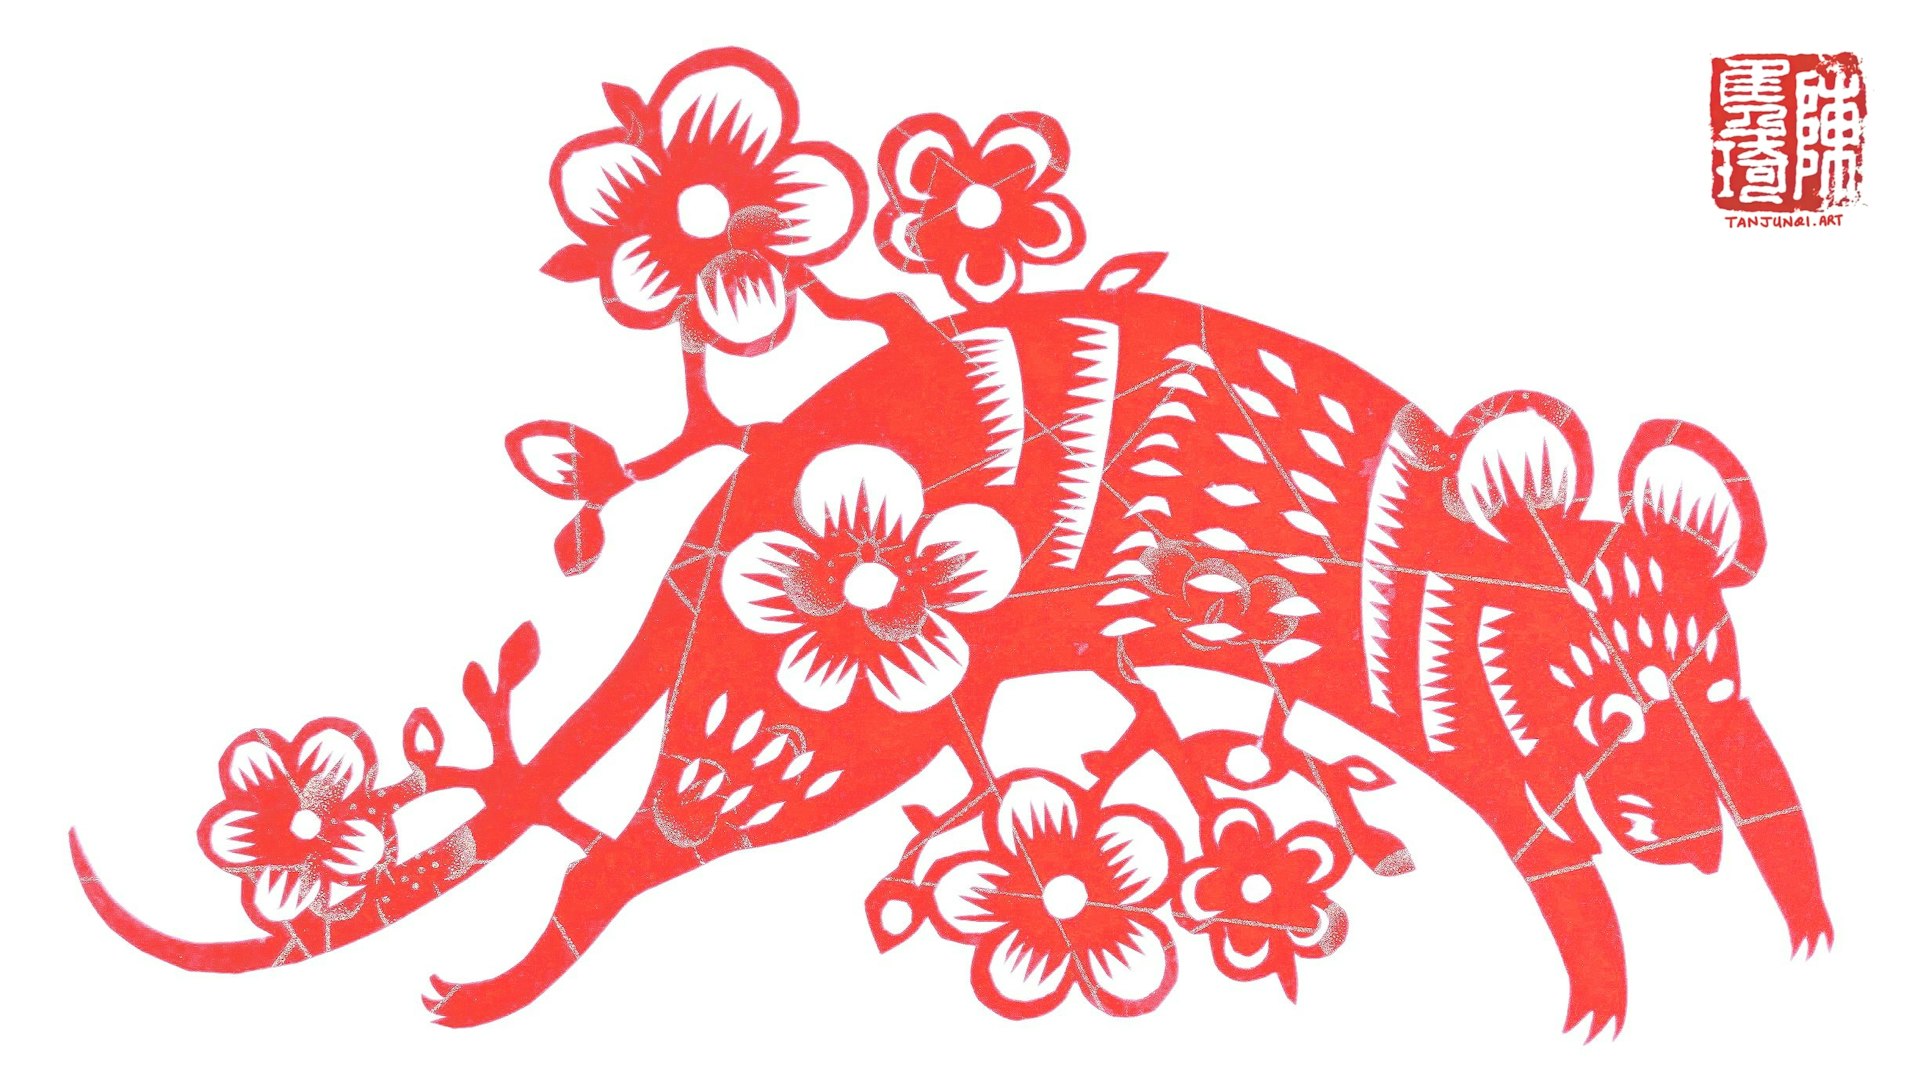 Chinese papercut of a rat prancing through the air amidst blooming cherry blossoms